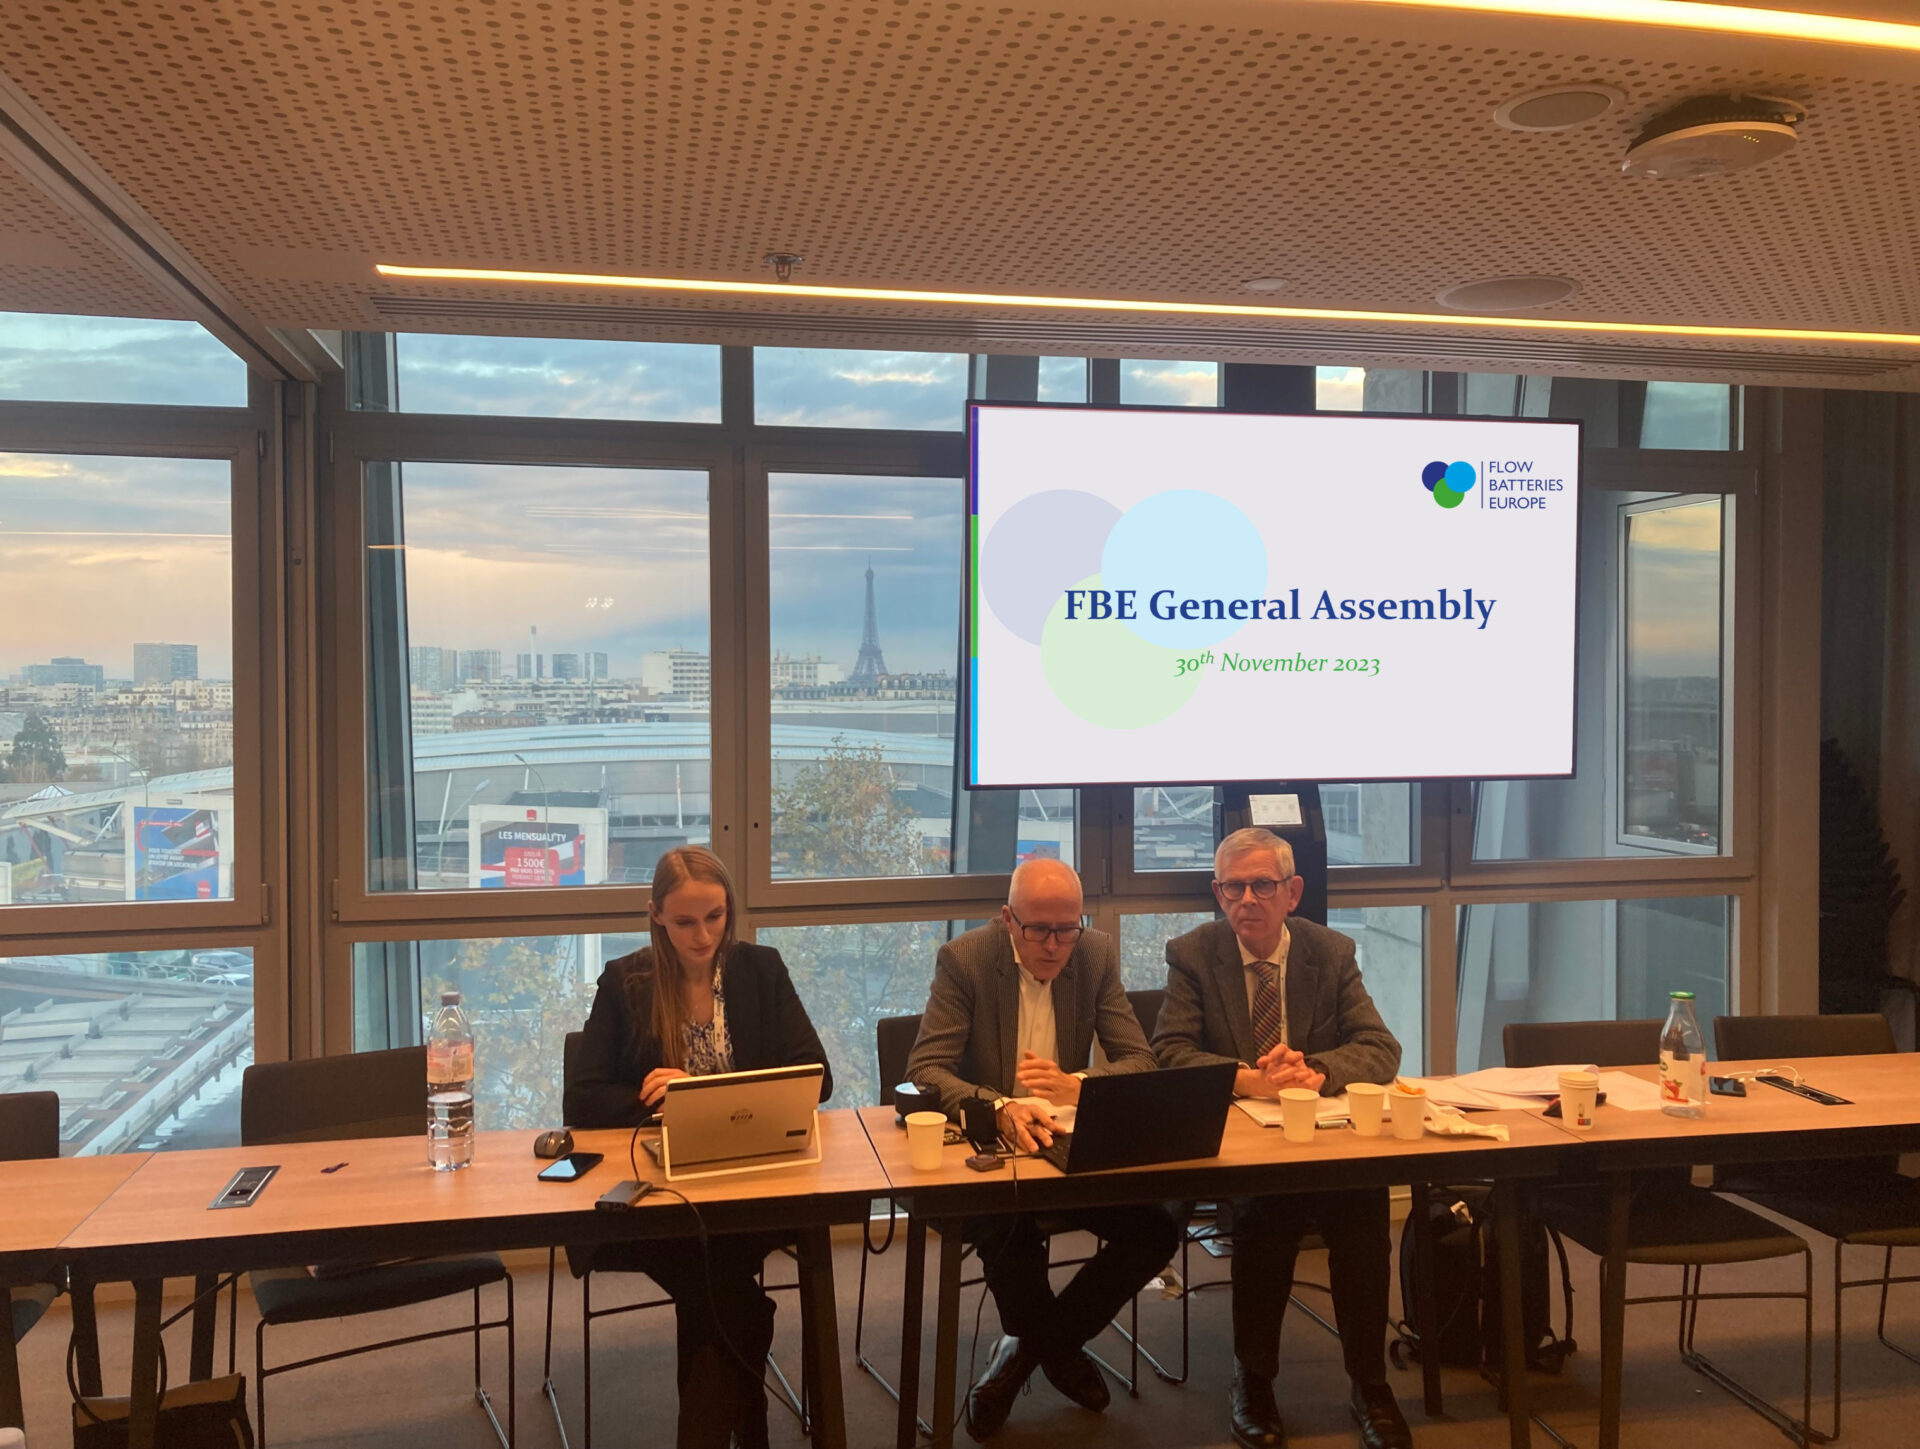 Flow battery stakeholders meet in Paris for FBE’s seventh General Assembly